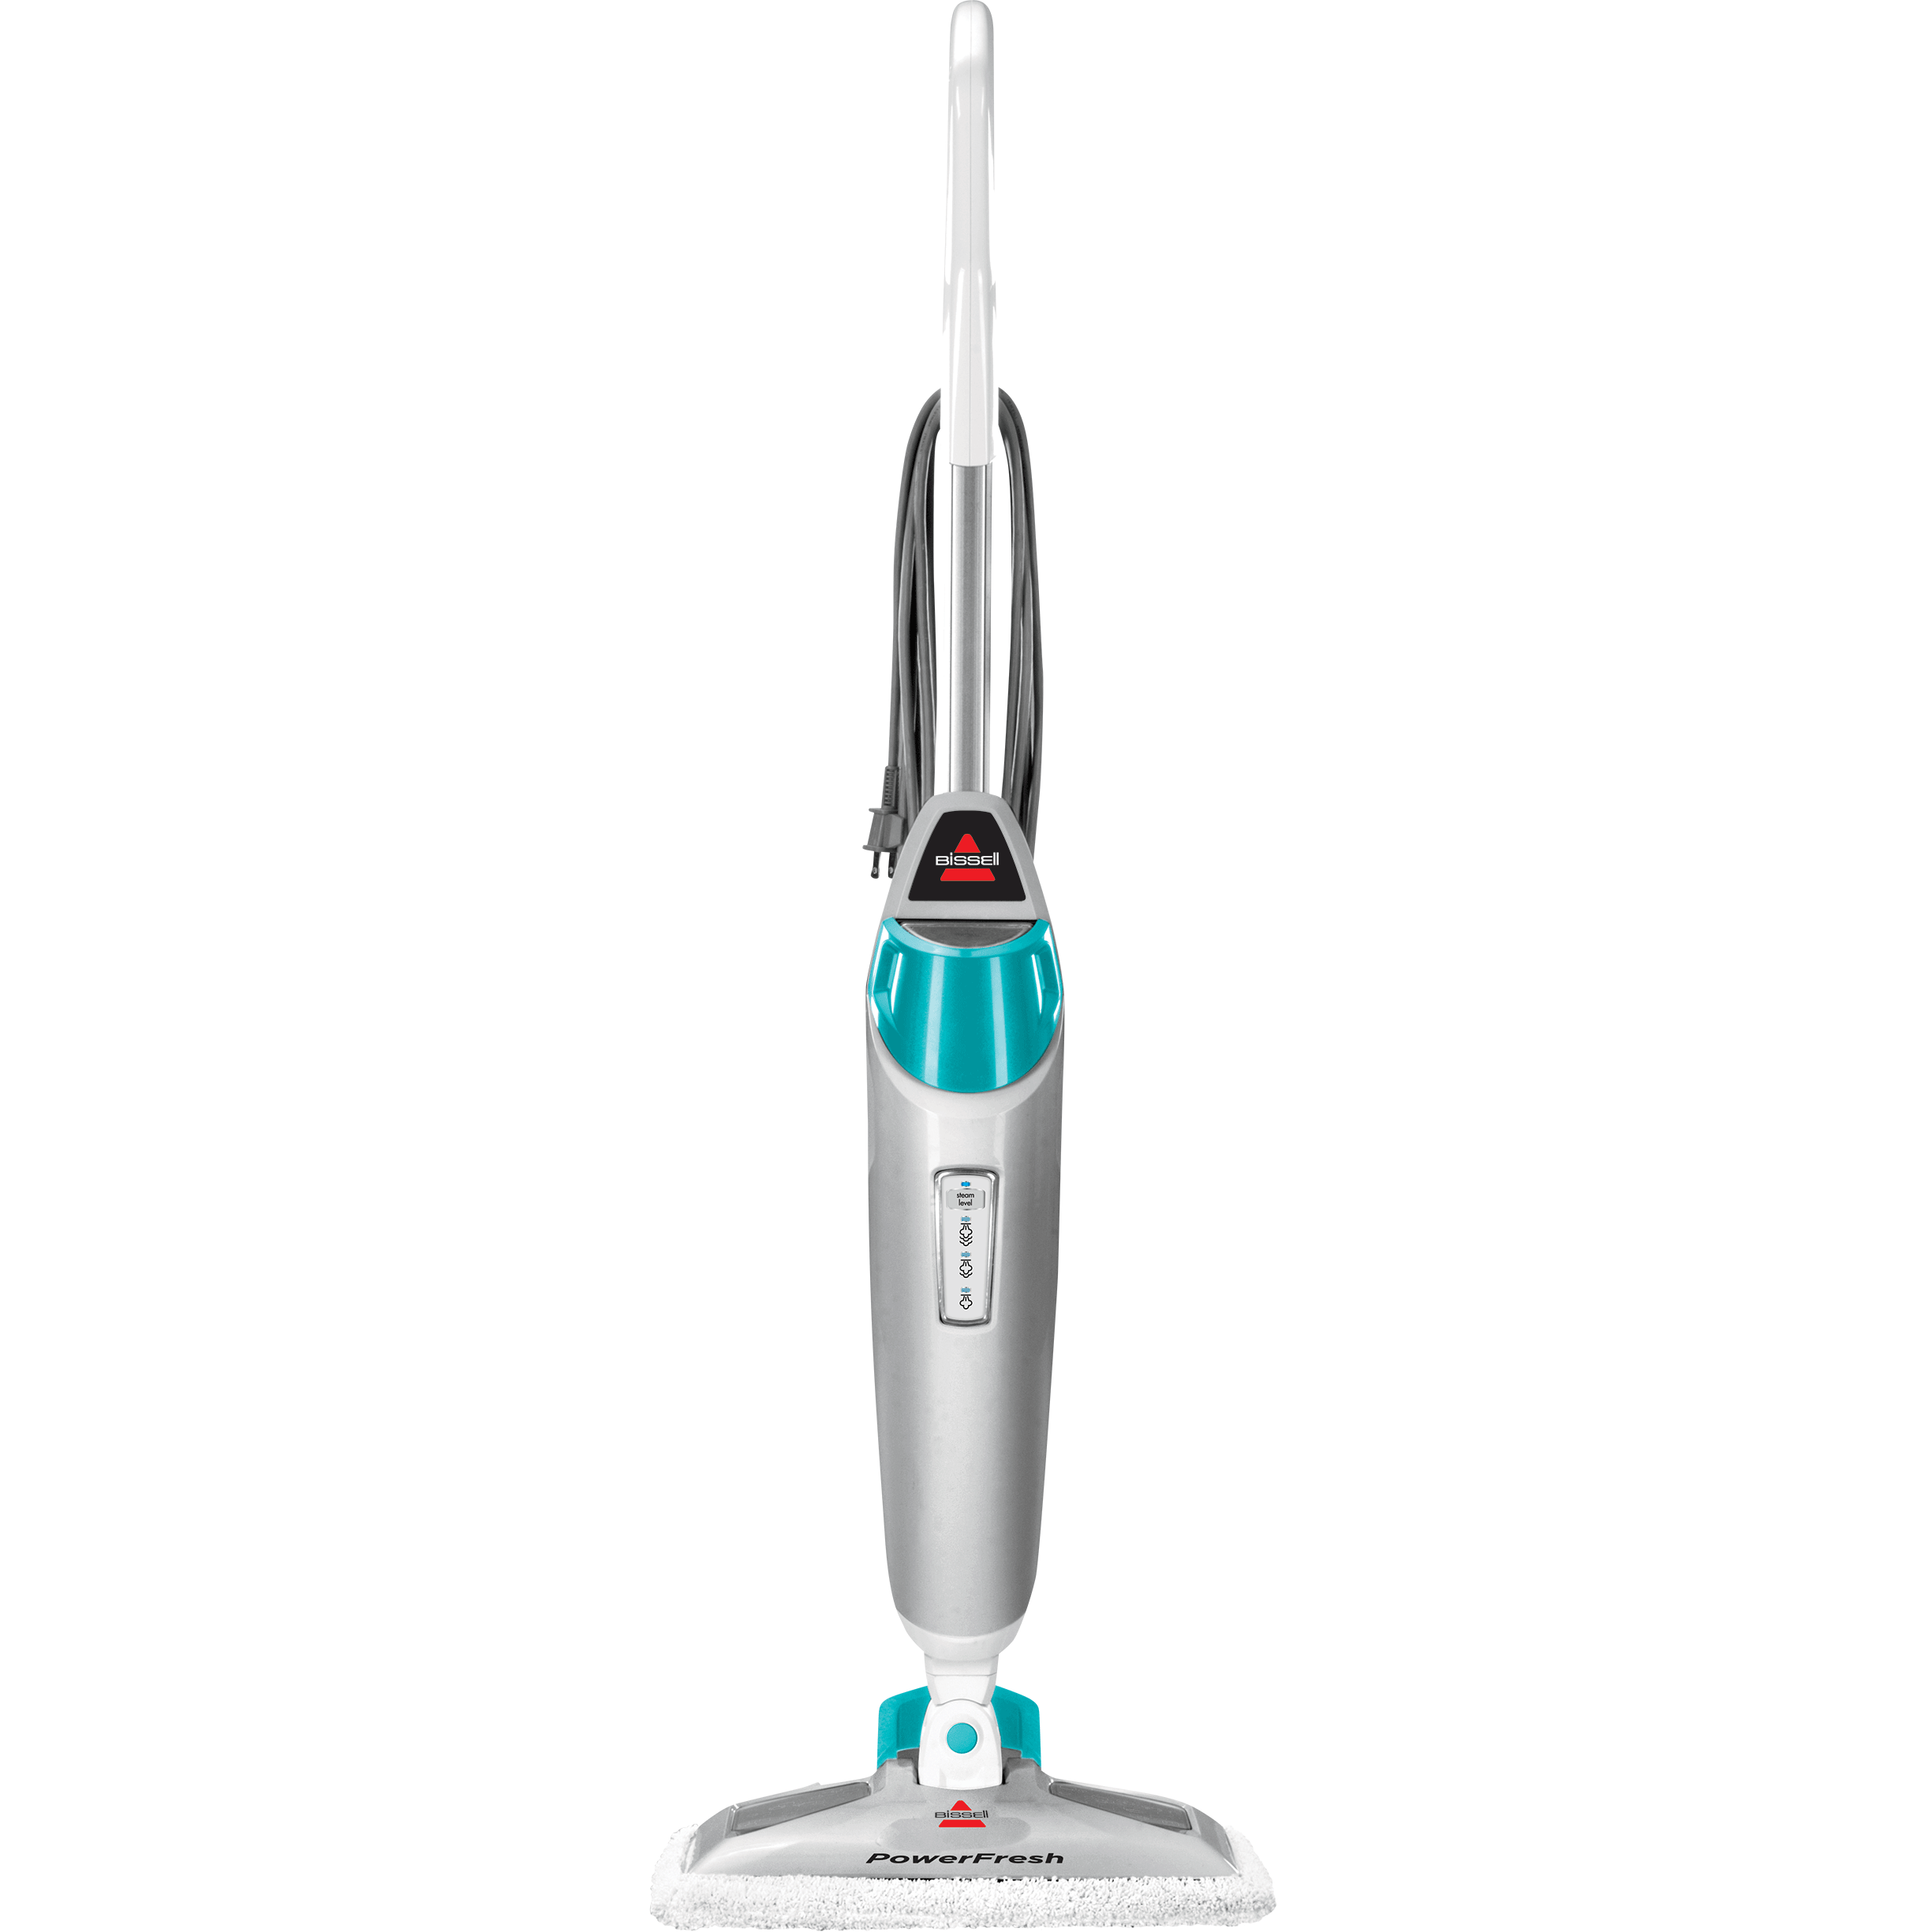 How To Use Bissell Powerfresh Steam Mop PowerFresh® Steam 19405 | BISSELL Scrubbing & Sanitizing Mop